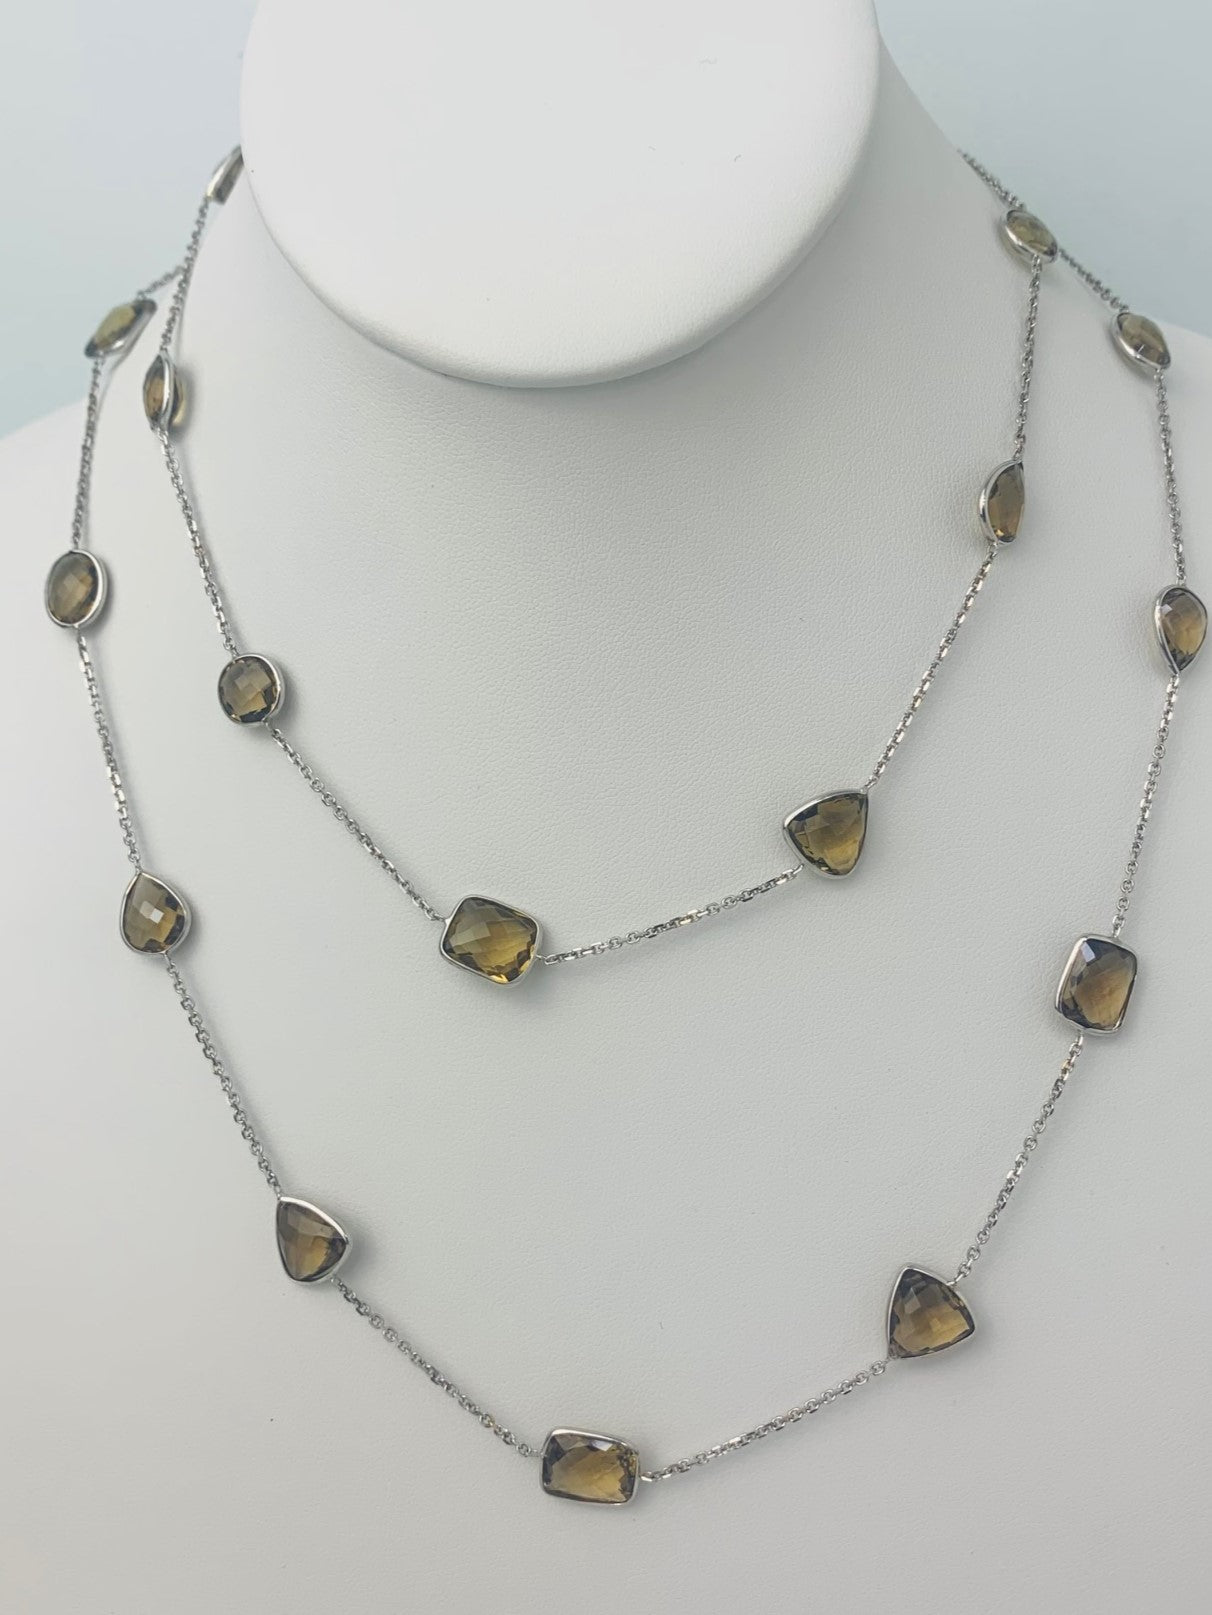 36" 20 Station Honey Quartz Round, Pear, Trilliant, Oval and Rectangular Checkerboard Bezel Necklace in 14KW NCK-174-BZGM14W-HQ-36